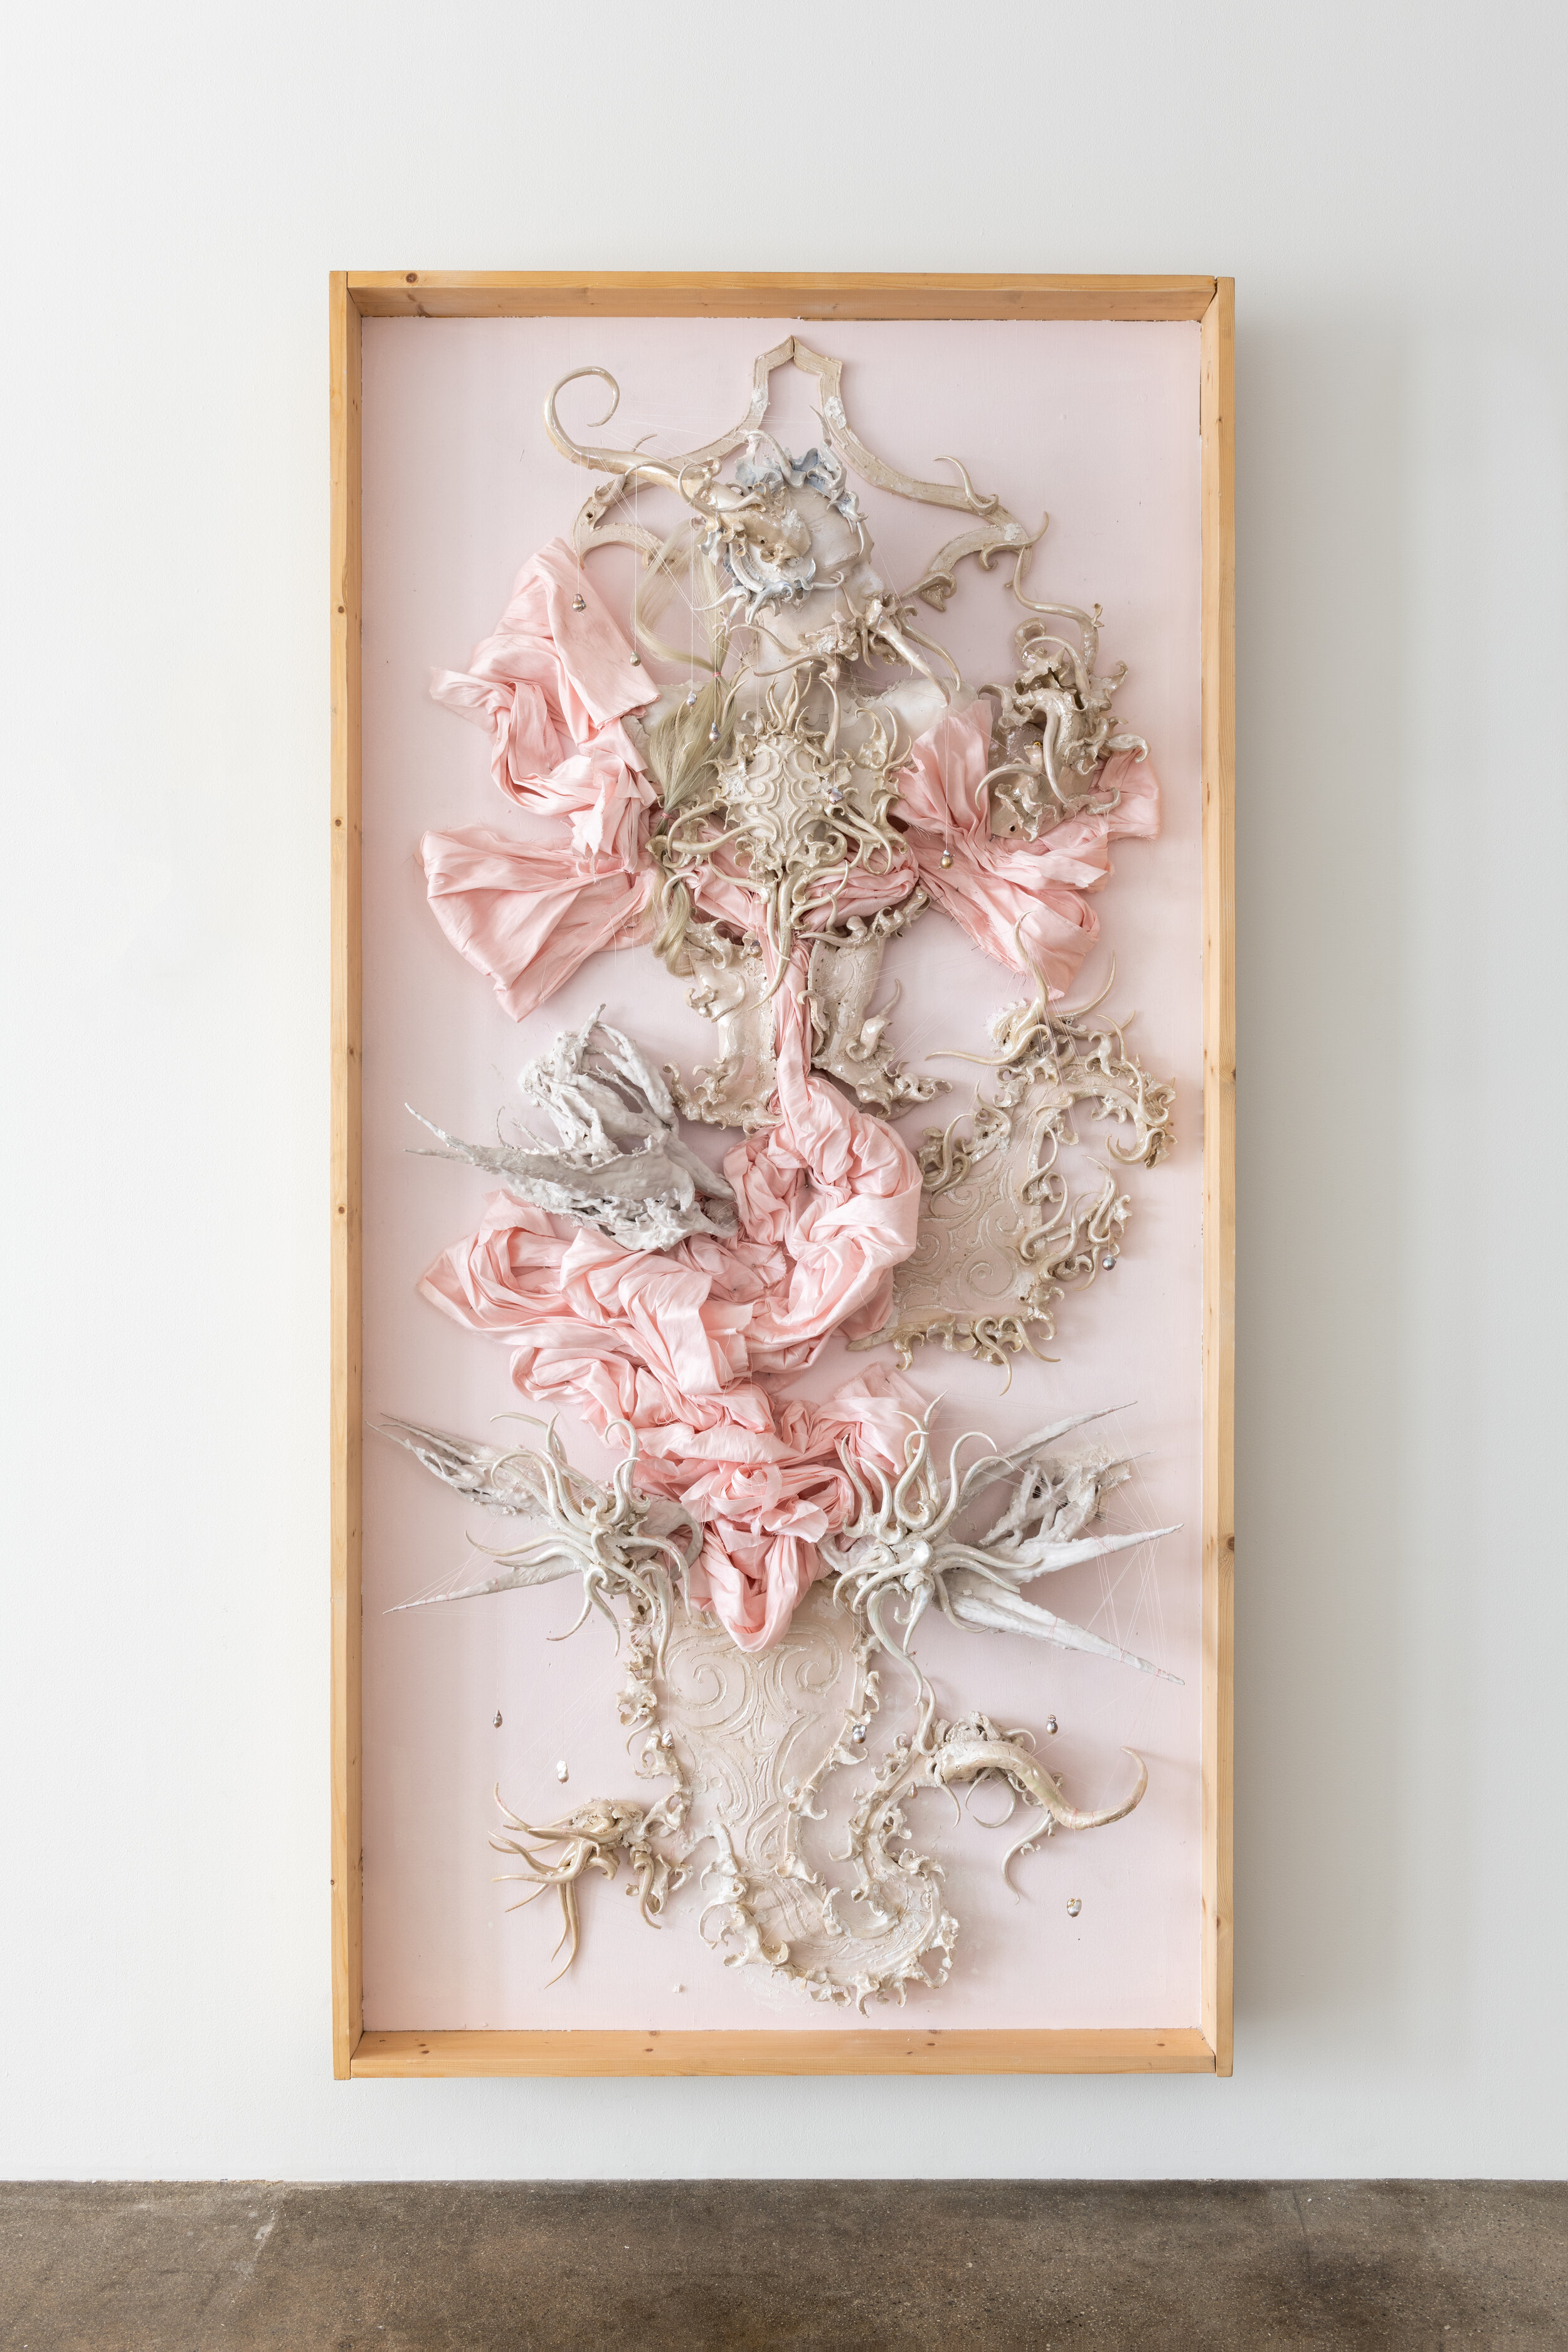  Evangeline AdaLioryn  The Pearl Eater  2021 Glazed porcelaineous stoneware, luster, silk,  birds of paradise, plaster, baroque keshi pearls,  silk thread, horse hair, wood, paint 96 x 48 x 13 inches  Photo by Ruben Diaz 